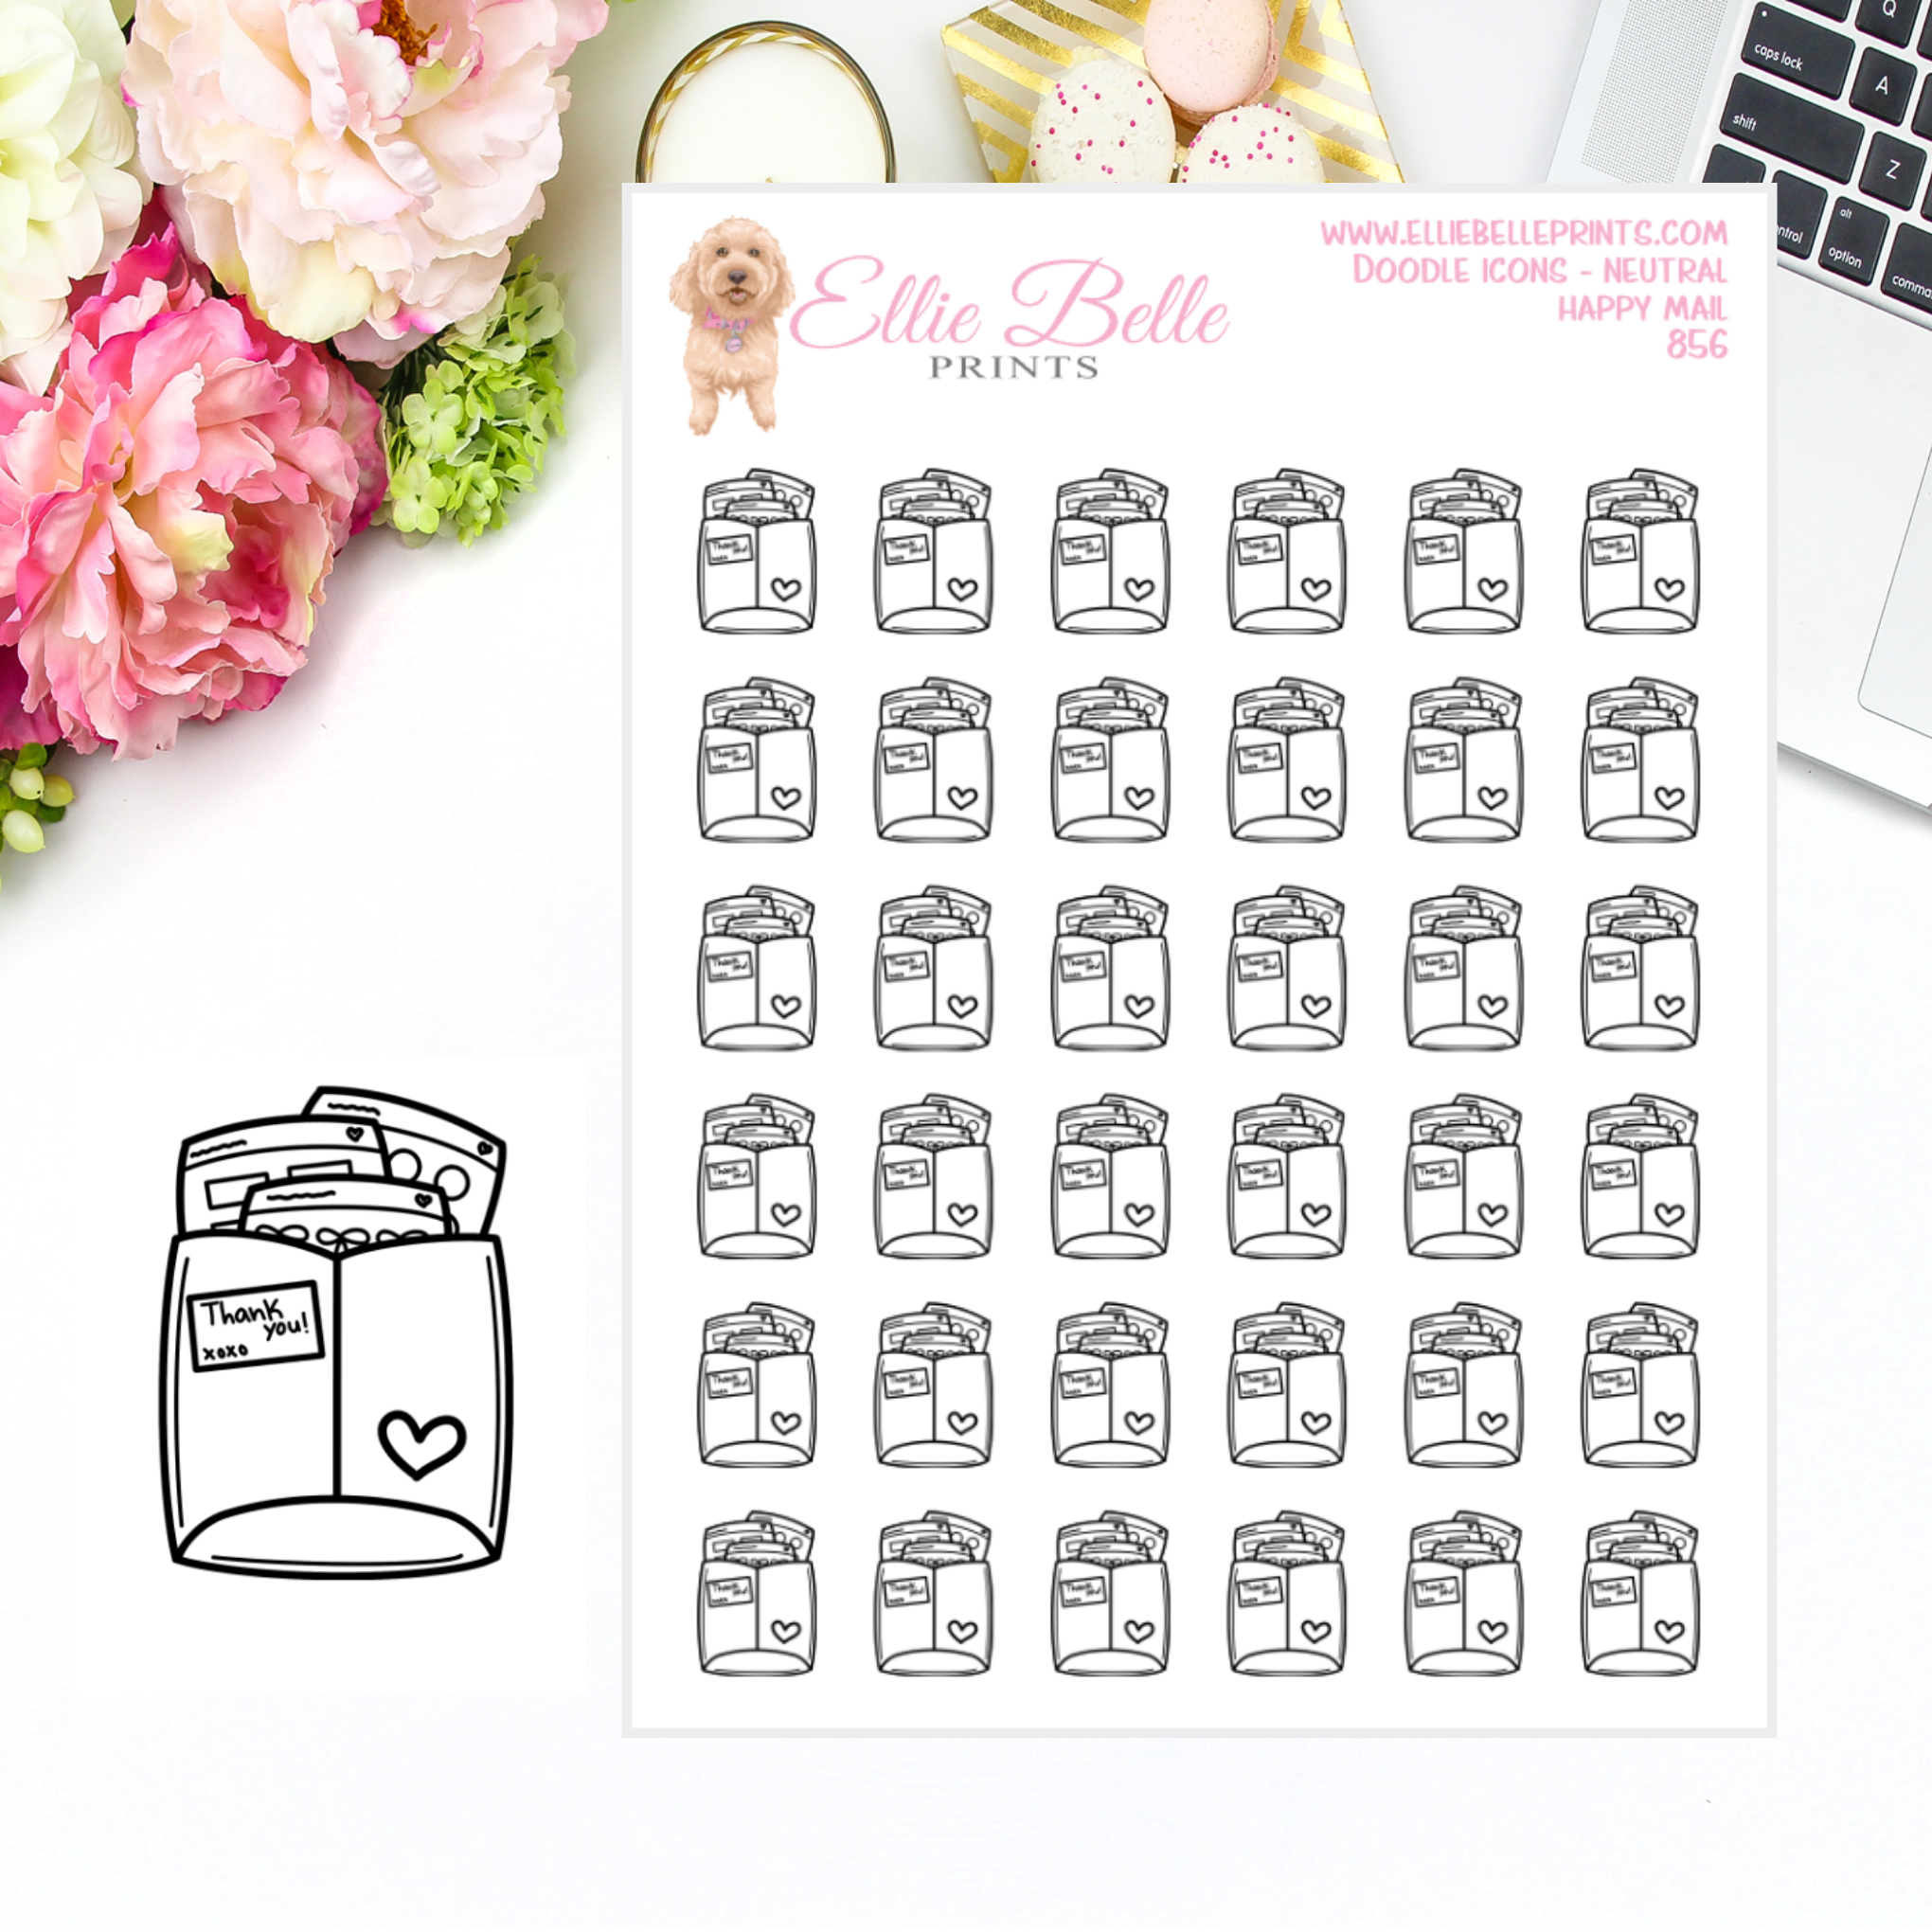 Happy Mail - Neutral Doodle Icons